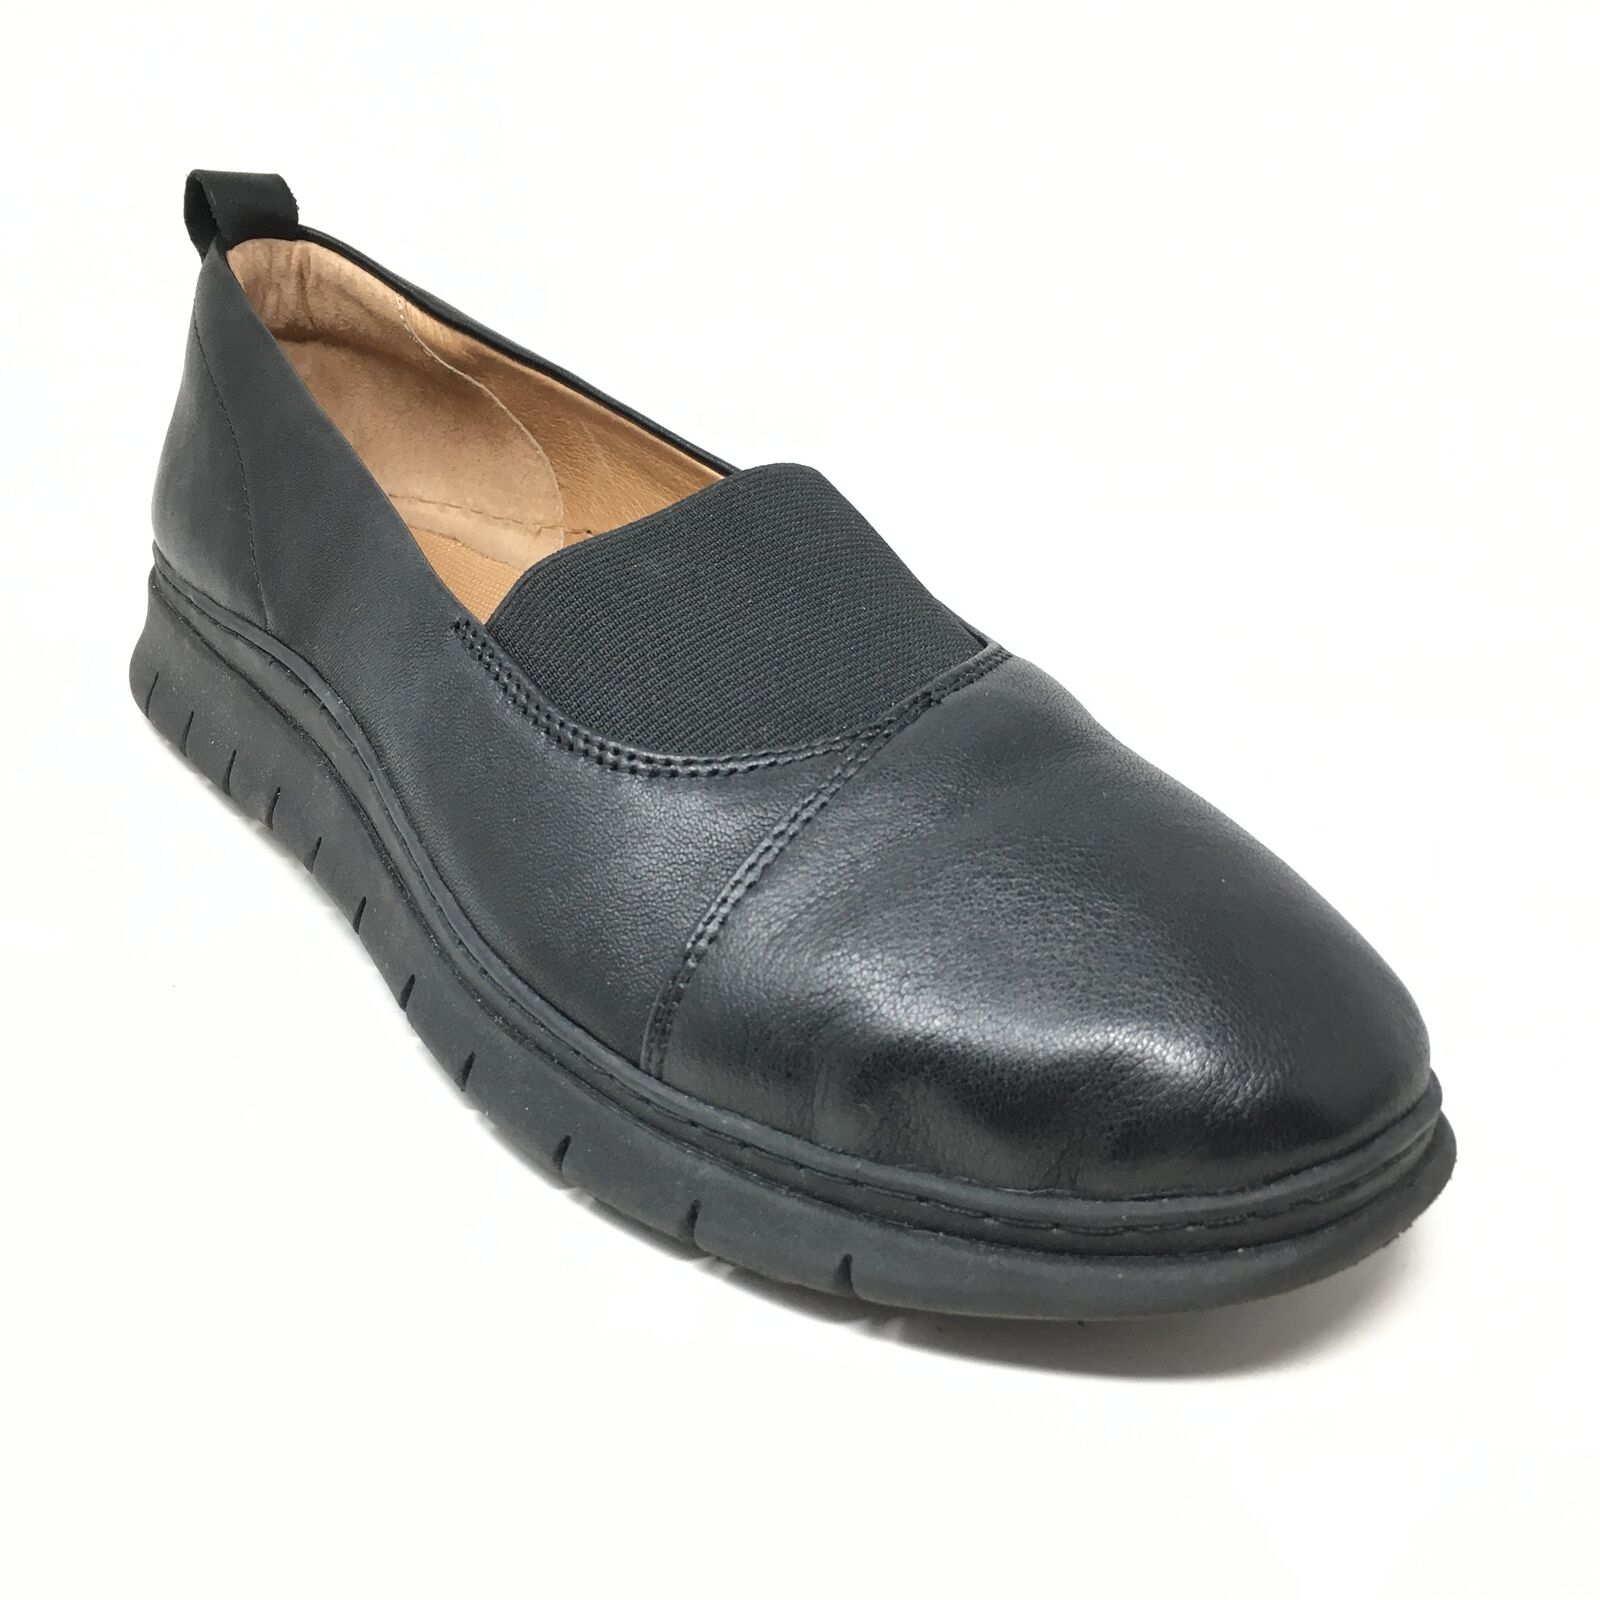 Women's Vionic Linden Casual Wedge Loafers Shoes Size 9 US/41 EU Black Leather